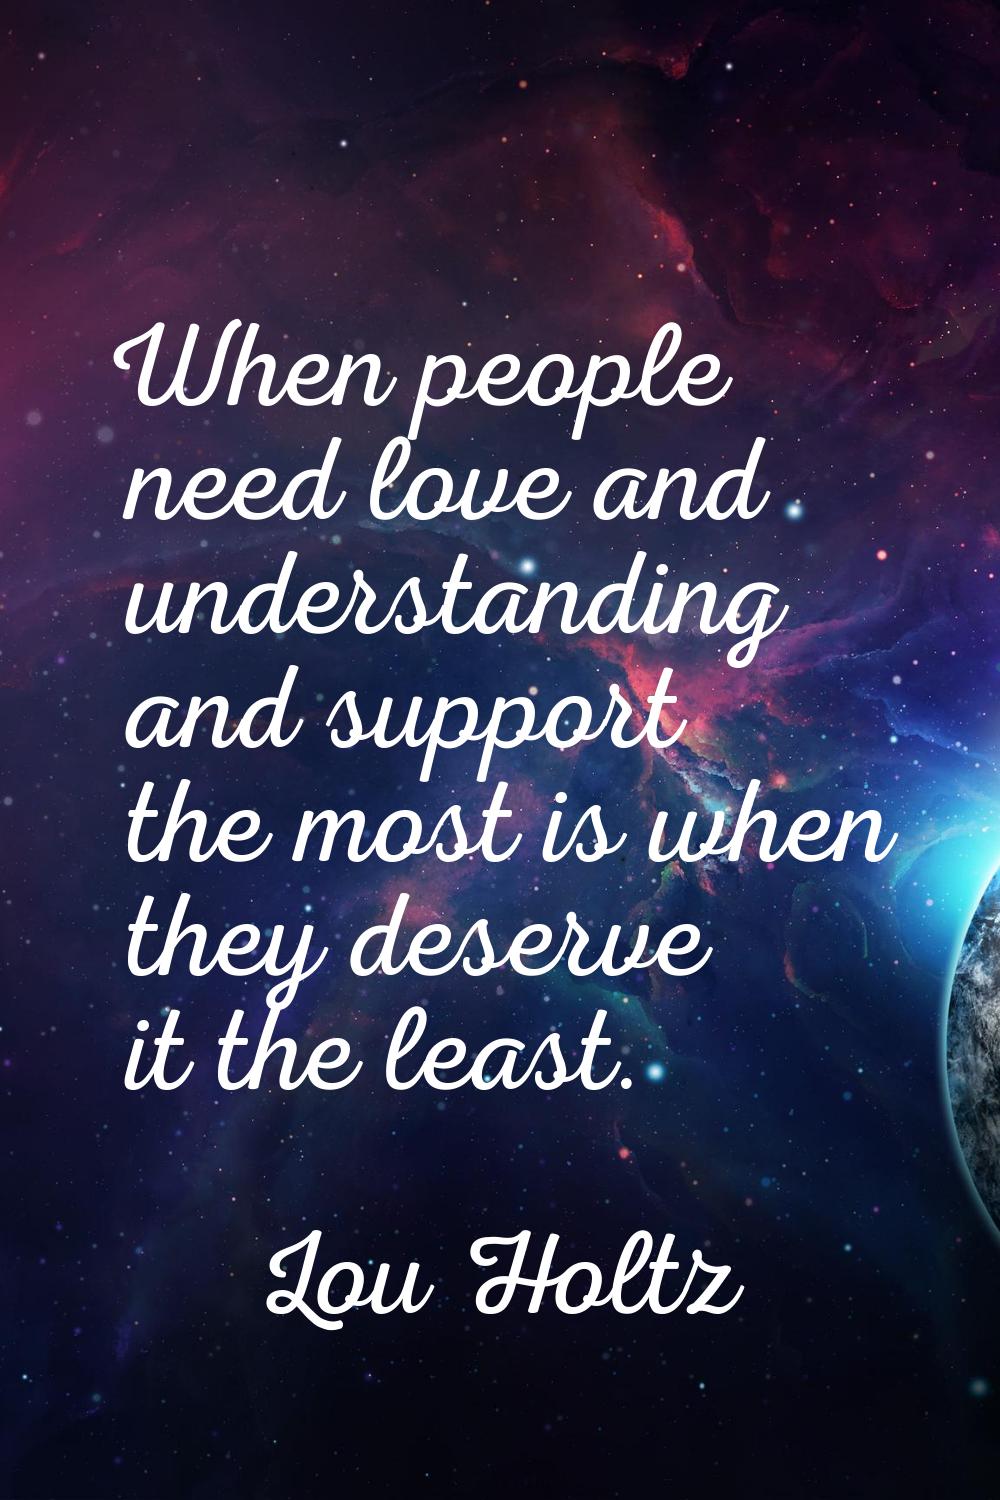 When people need love and understanding and support the most is when they deserve it the least.